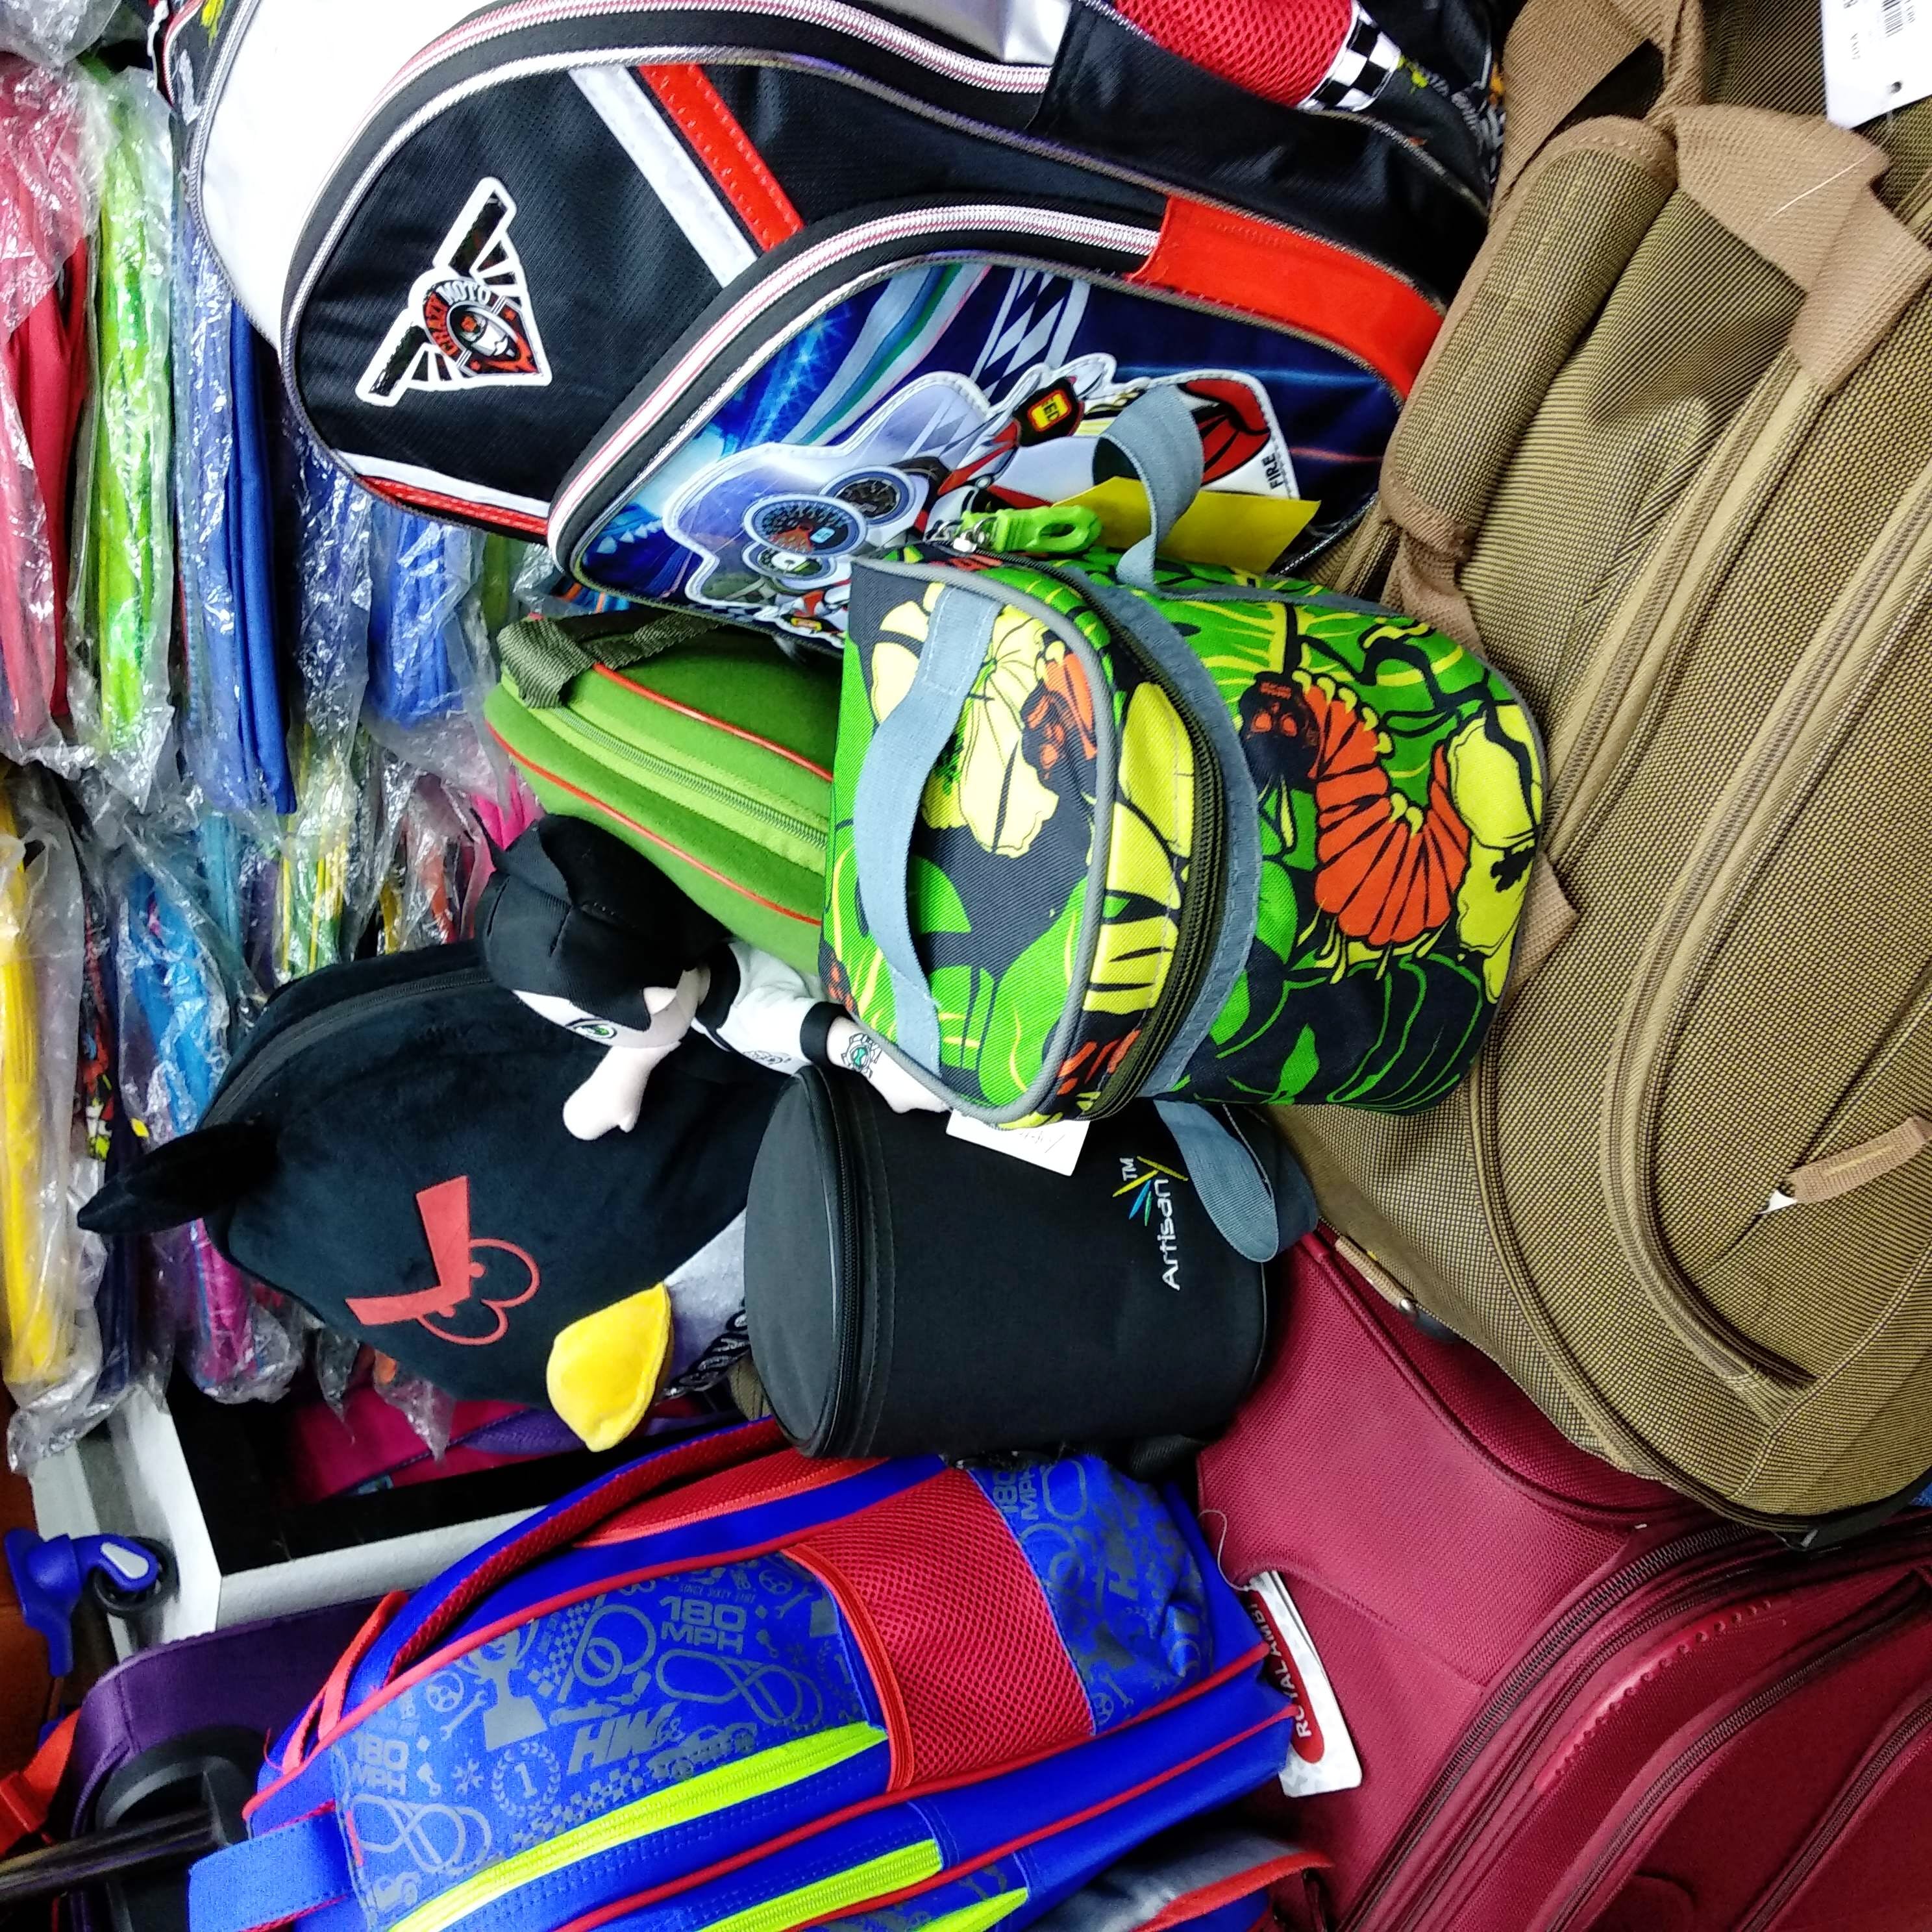 Helmet,Personal protective equipment,Motorcycle helmet,Headgear,Fashion accessory,Hand luggage,Baggage